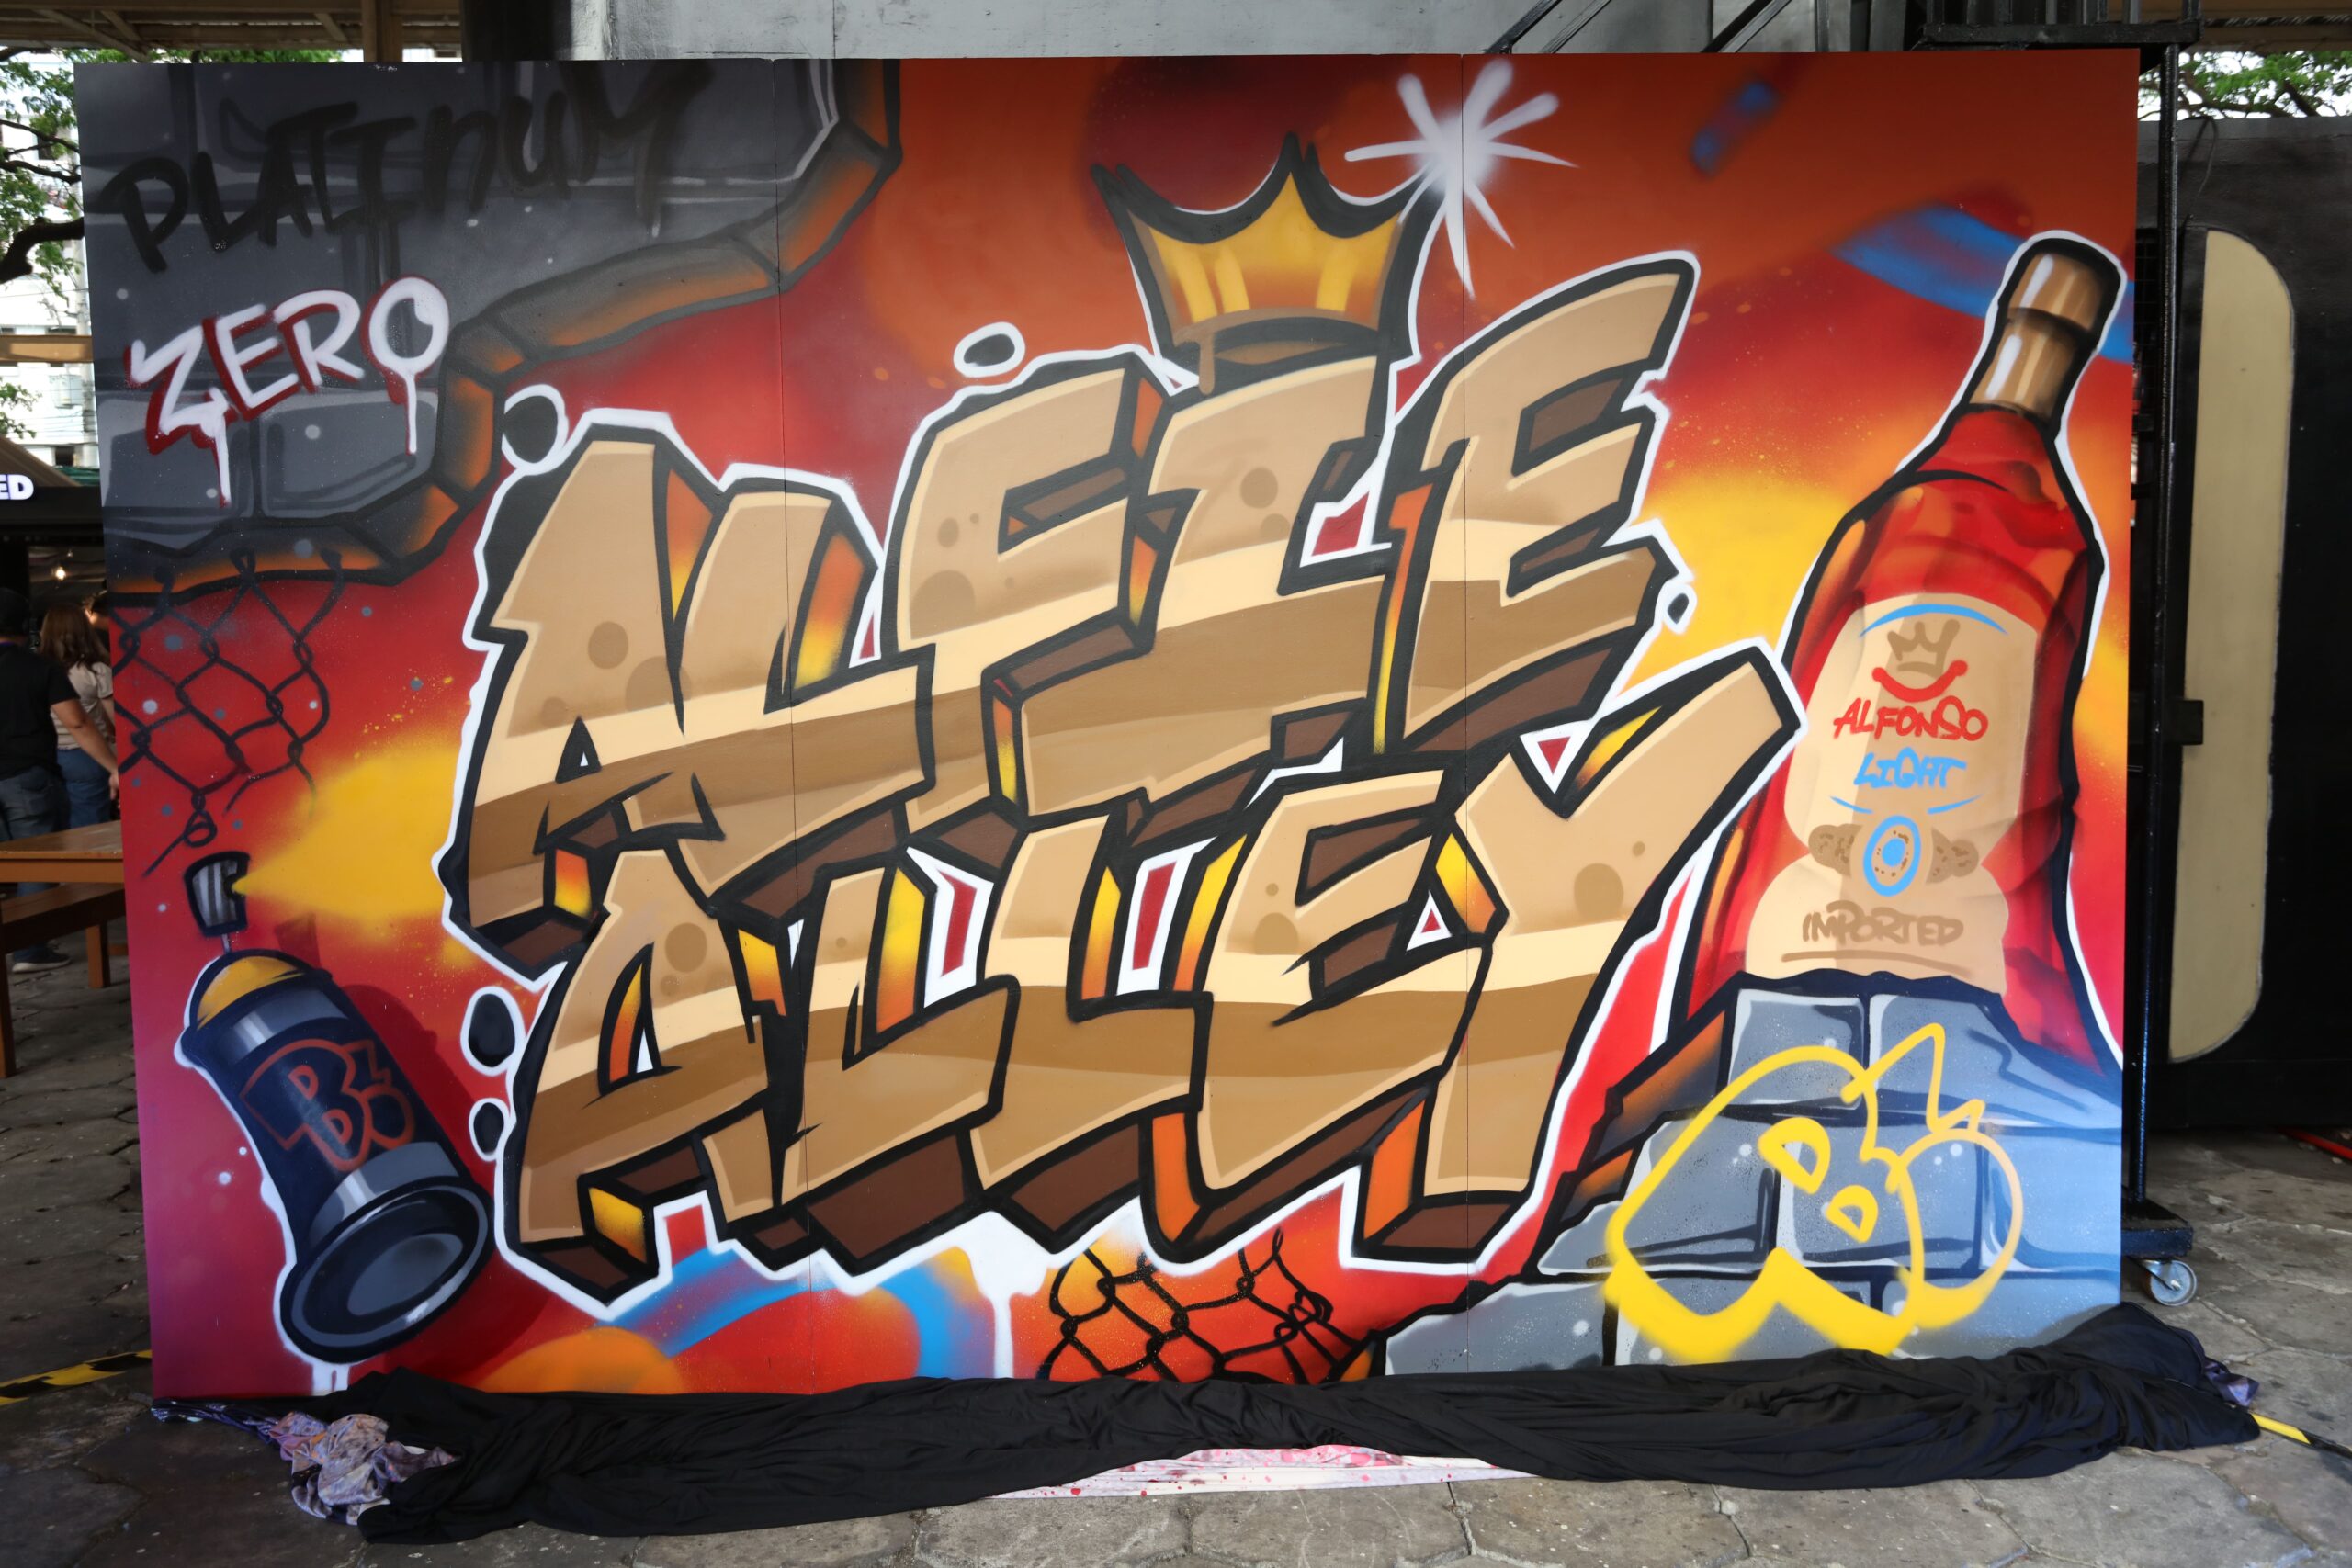 Alfie Alley graffiti wall was unveiled during the program